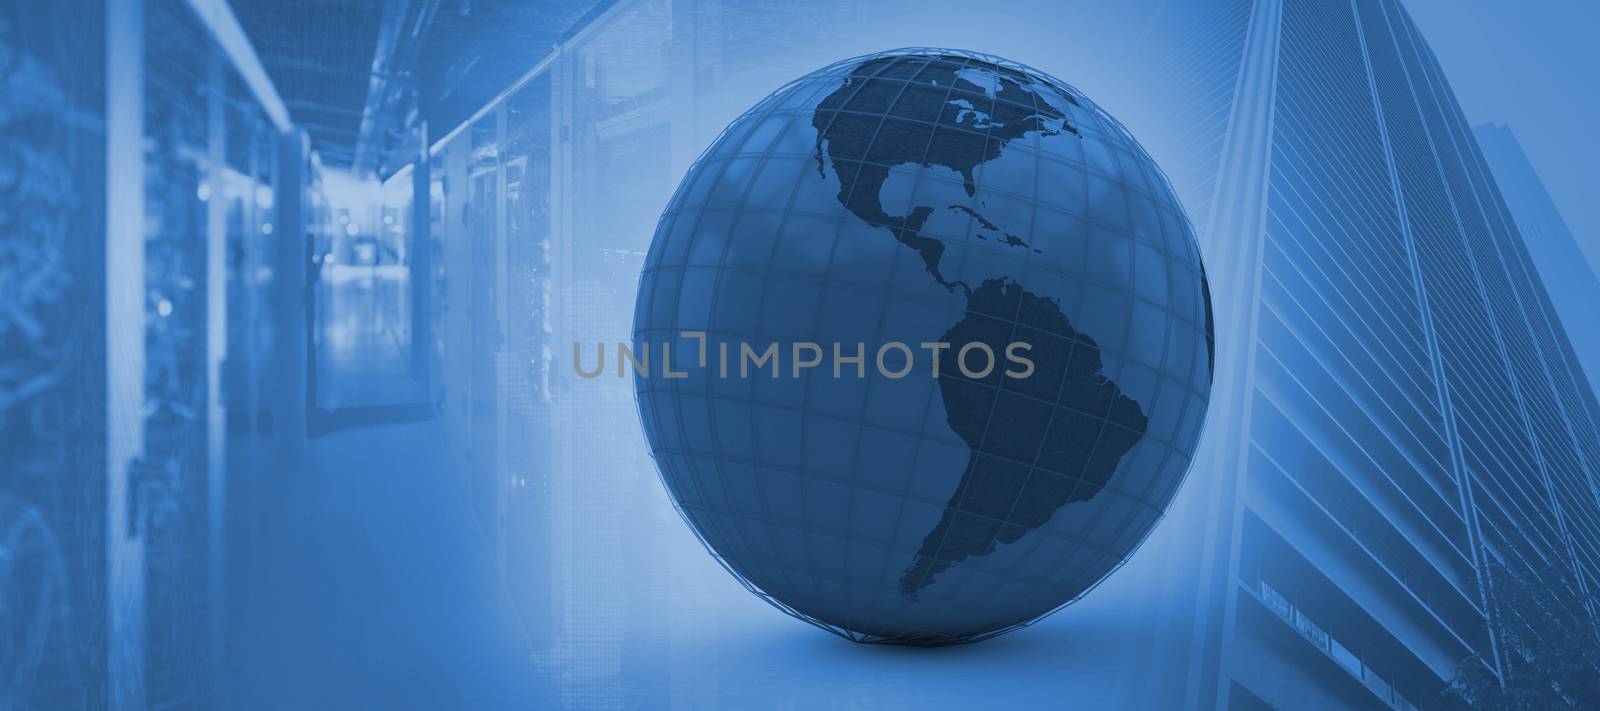 Composite image of 3d image of globe by Wavebreakmedia